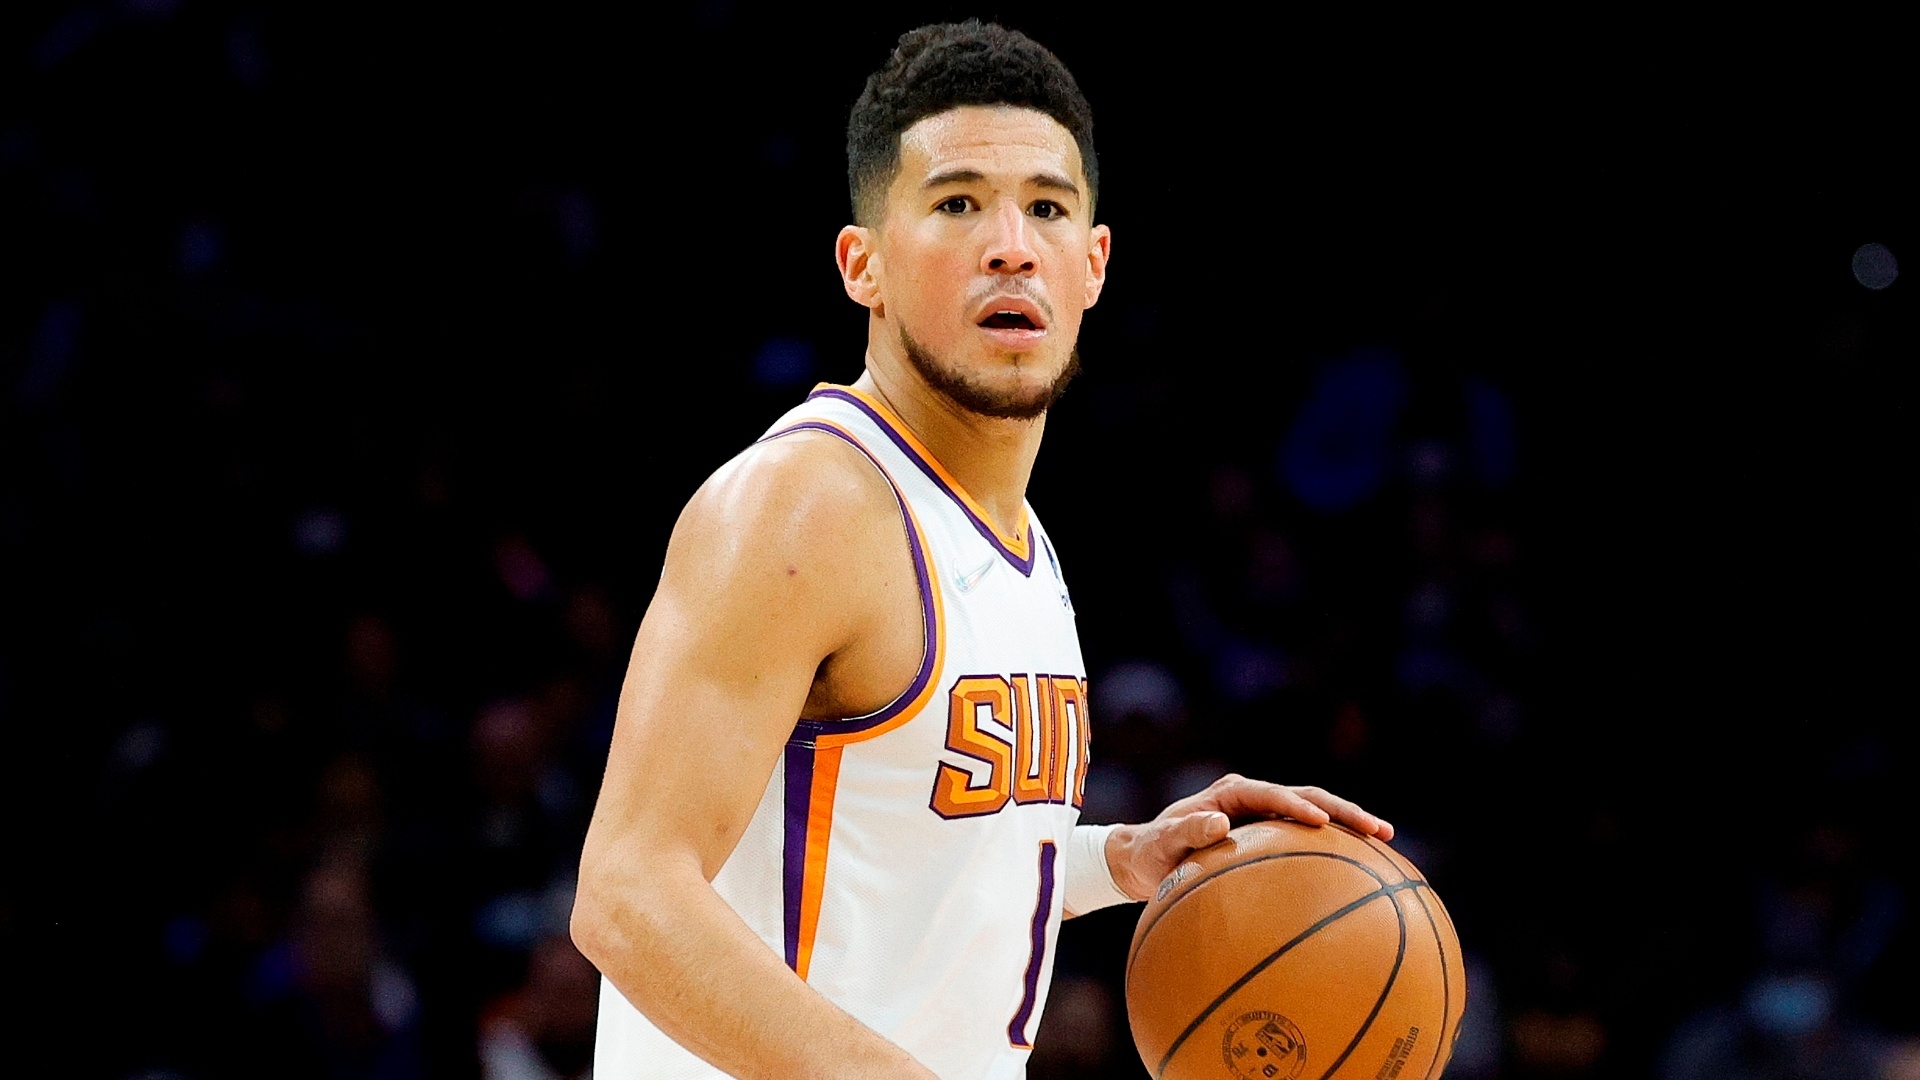 Devin Booker, Sports, Health and safety protocols, Sporting news, 1920x1080 Full HD Desktop